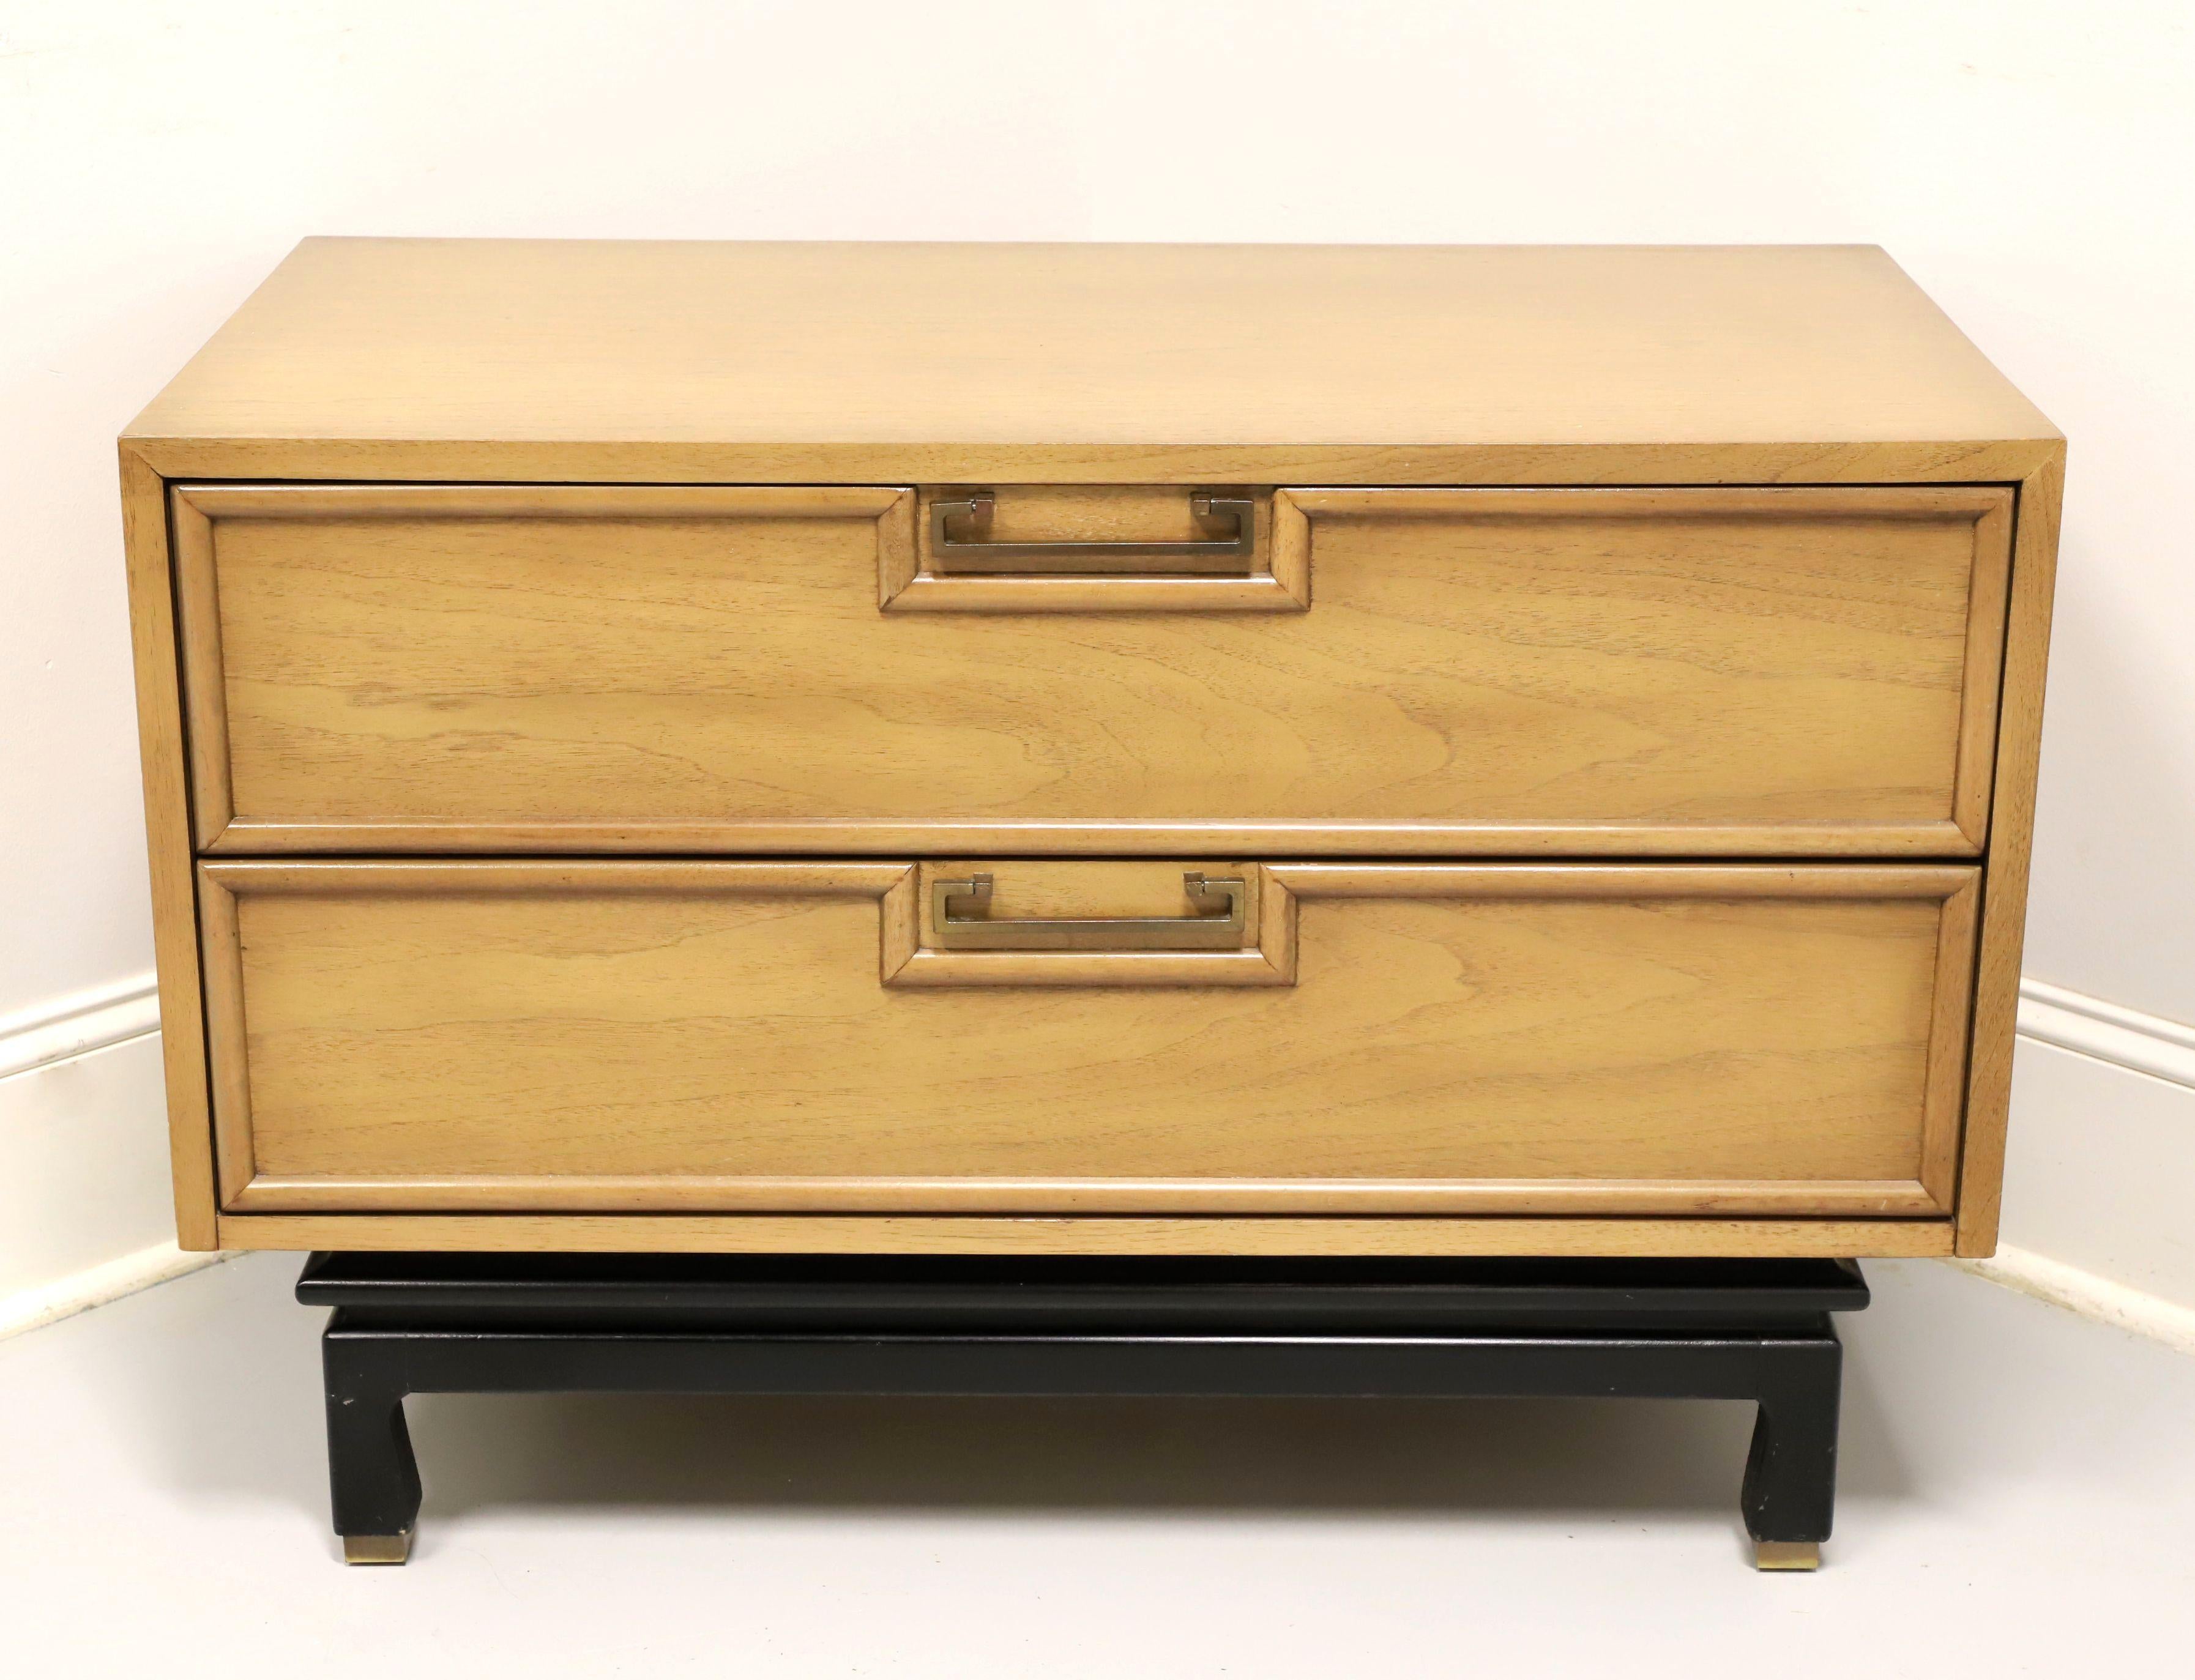 An Asian inspired two-drawer nightstand by American of Martinsville. Walnut with a light blonde finish, smooth top, brass hardware, black painted slightly raised base on four legs with base caps. Features two drawers of dovetail construction, top